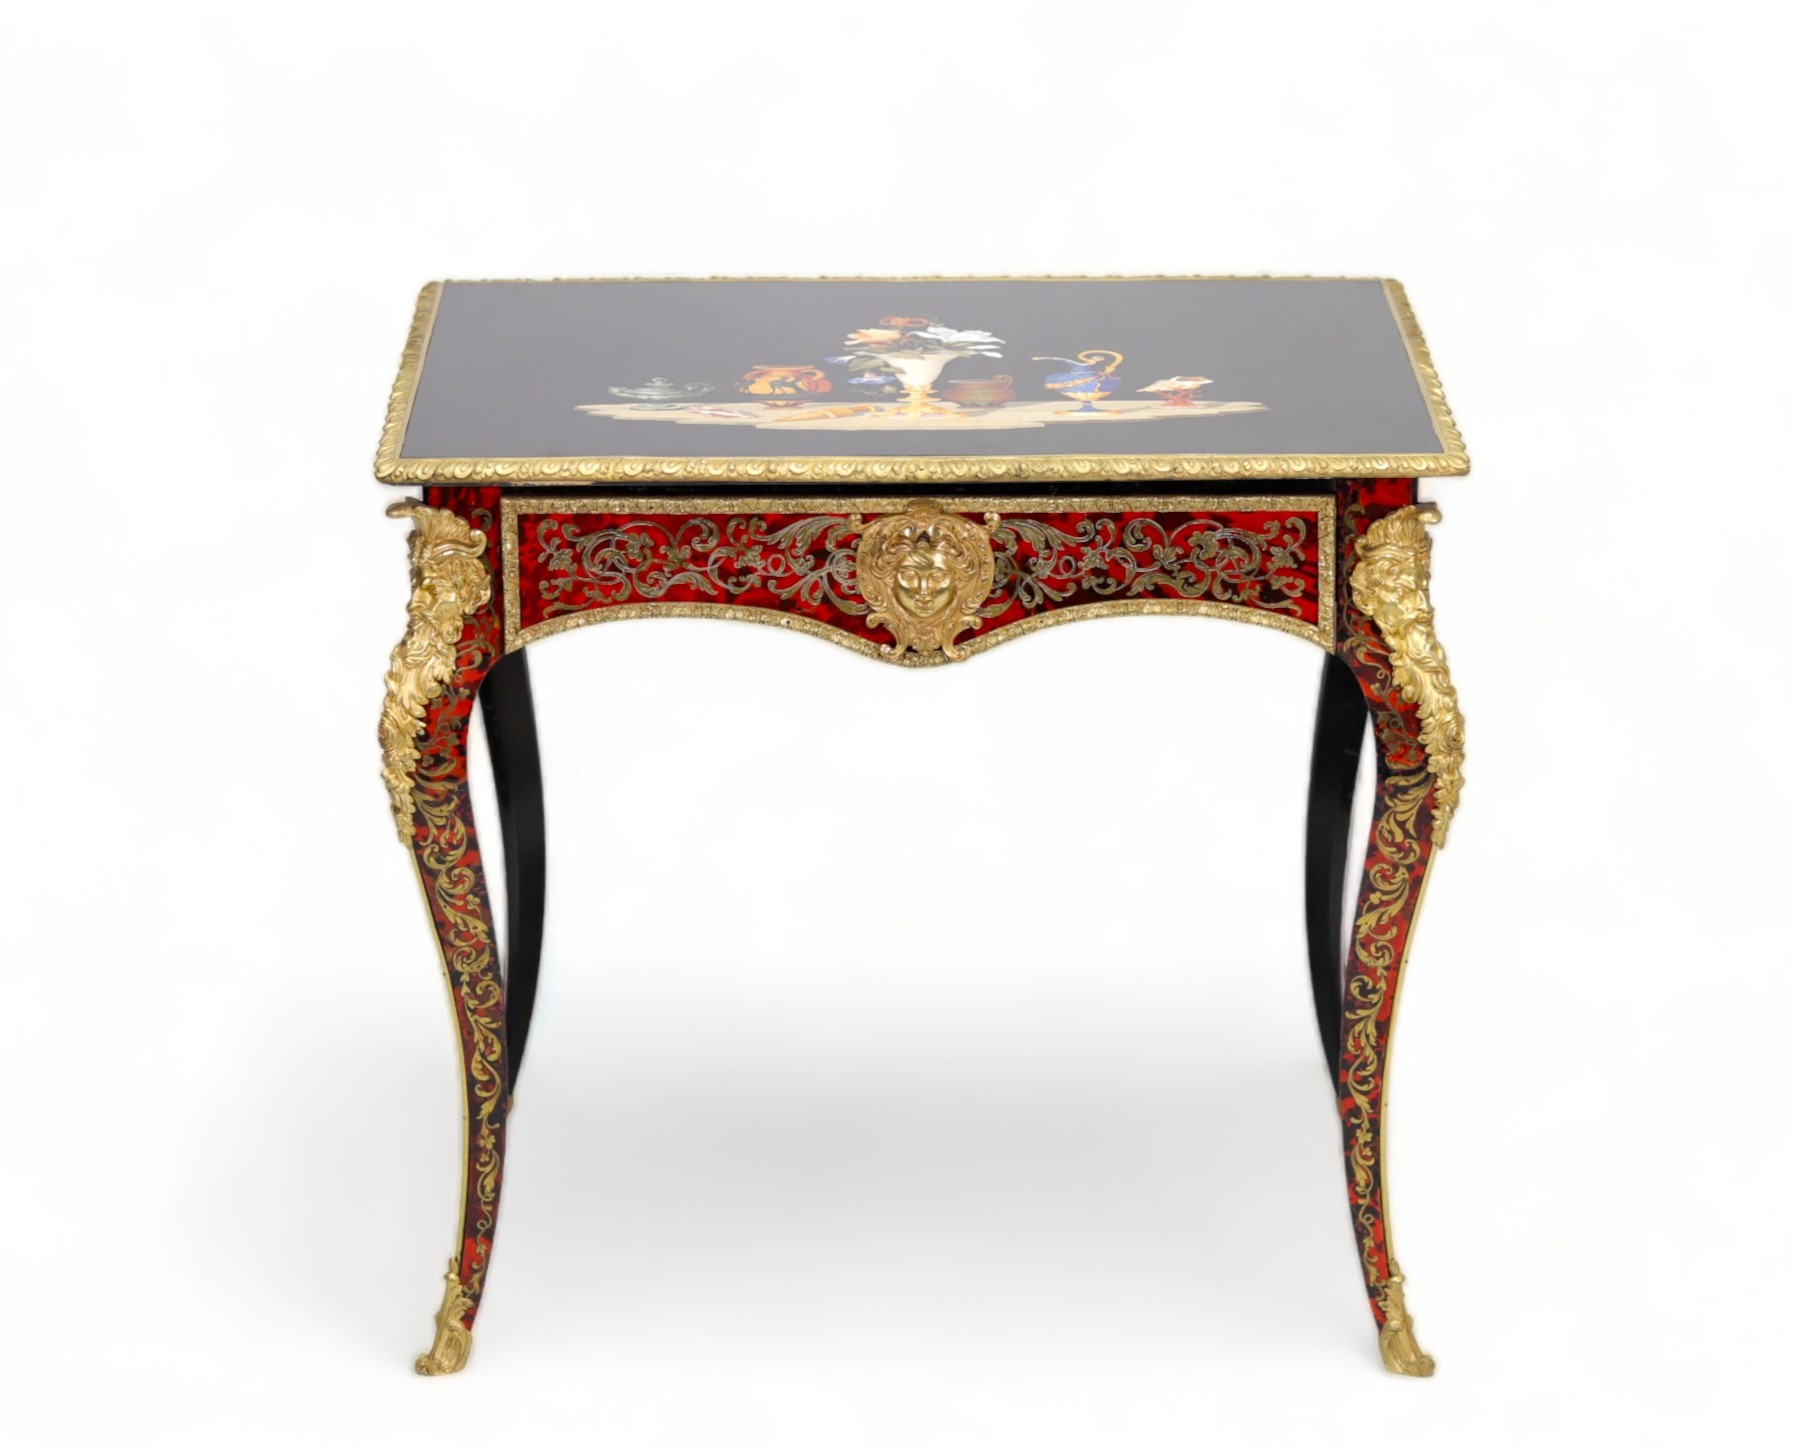 Alphonse GIROUX (1776-1848) Exceptional marble and gilt bronze marquetry table. Stamped "Alph. Girou